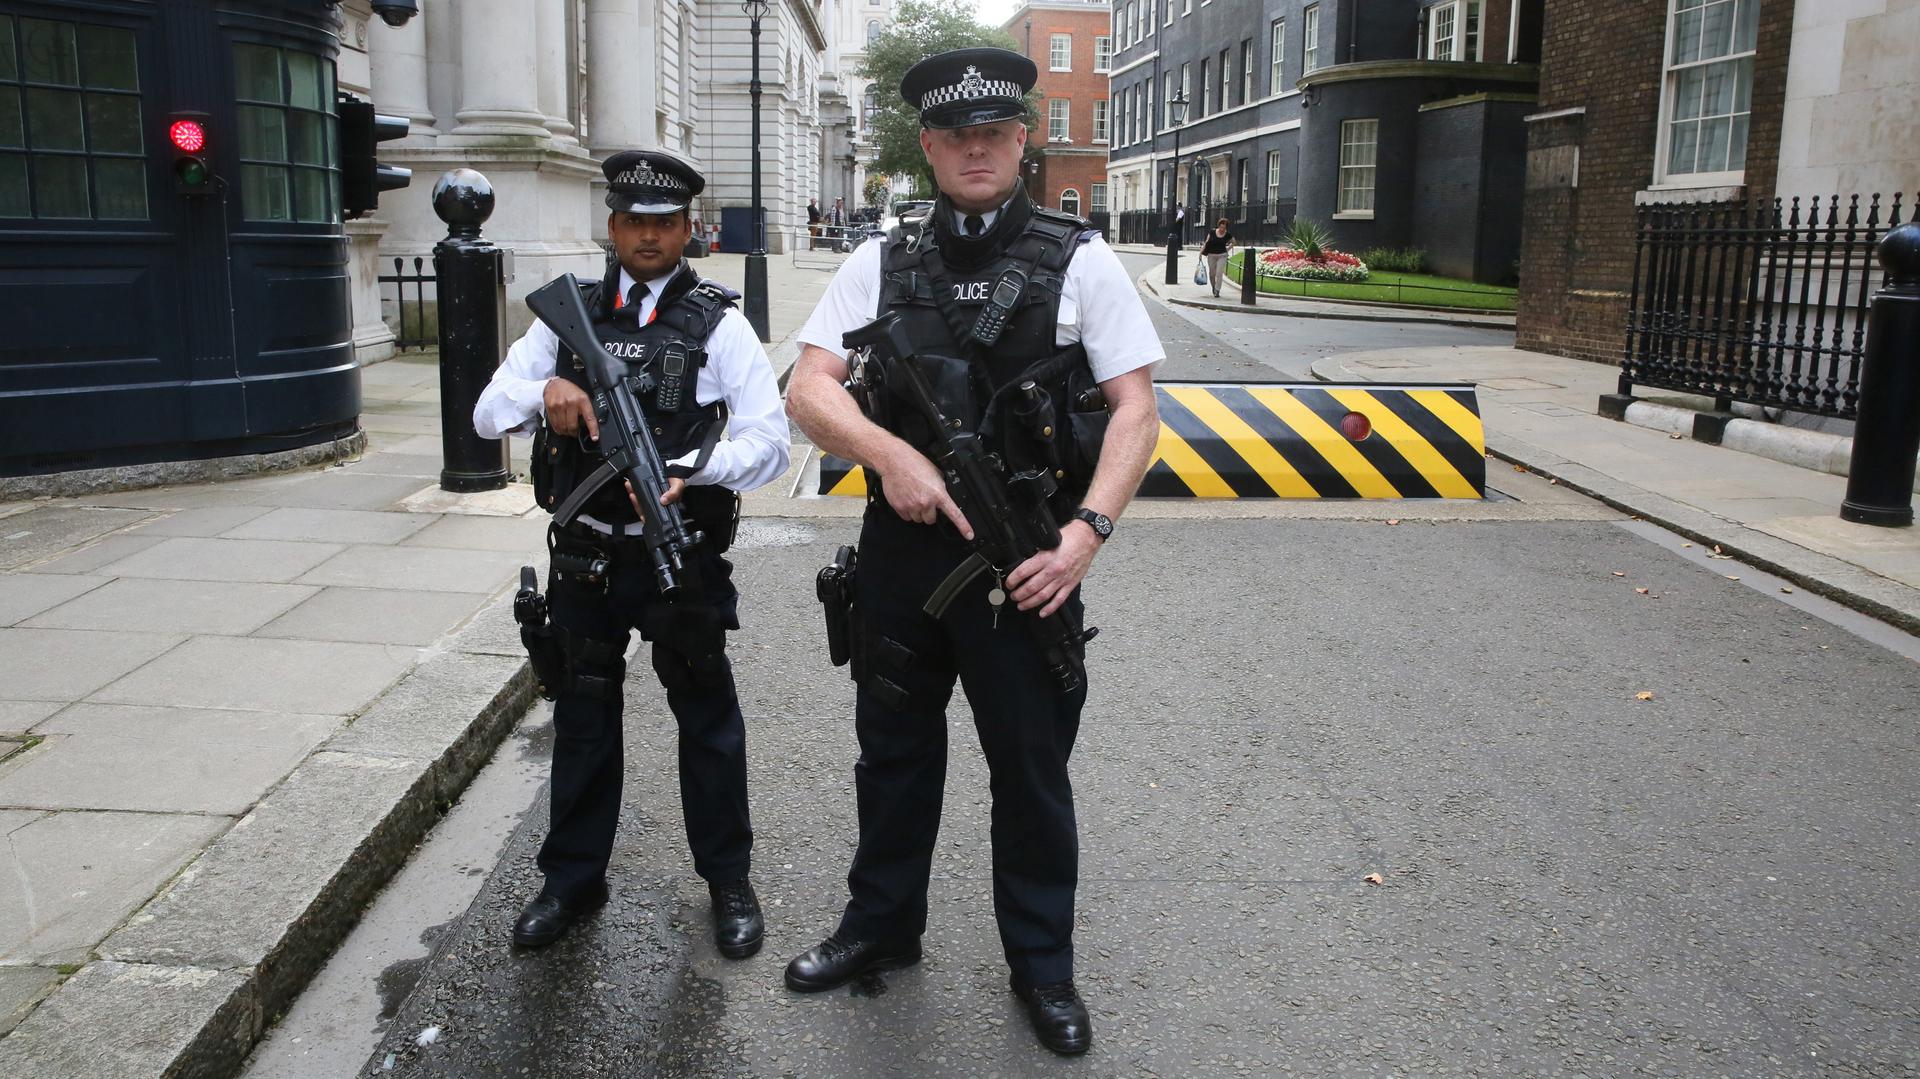 Armed police officers pose for the media on Downing Street, in central London, on August 29, 2014.